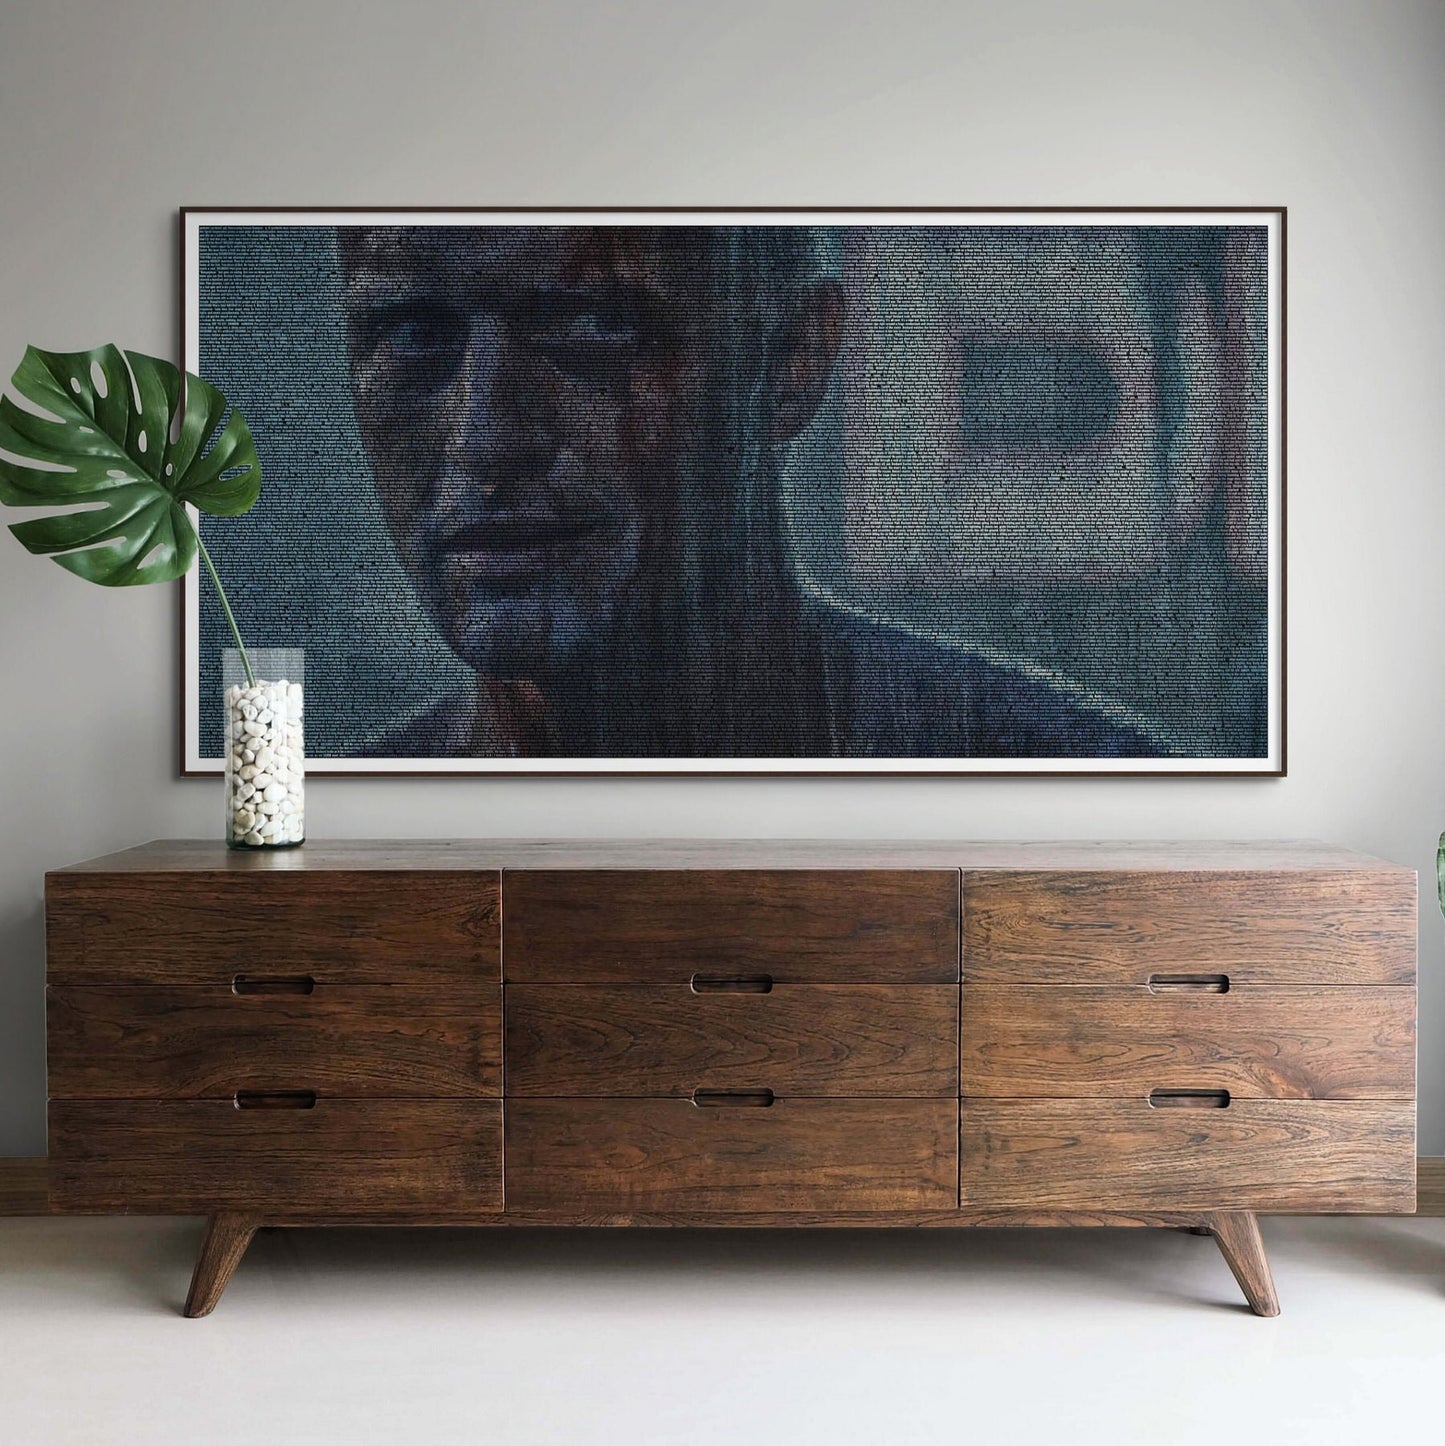 A framed portrait of Roy Batty, typographically created from the Blade Runner screenplay. In a home setting.